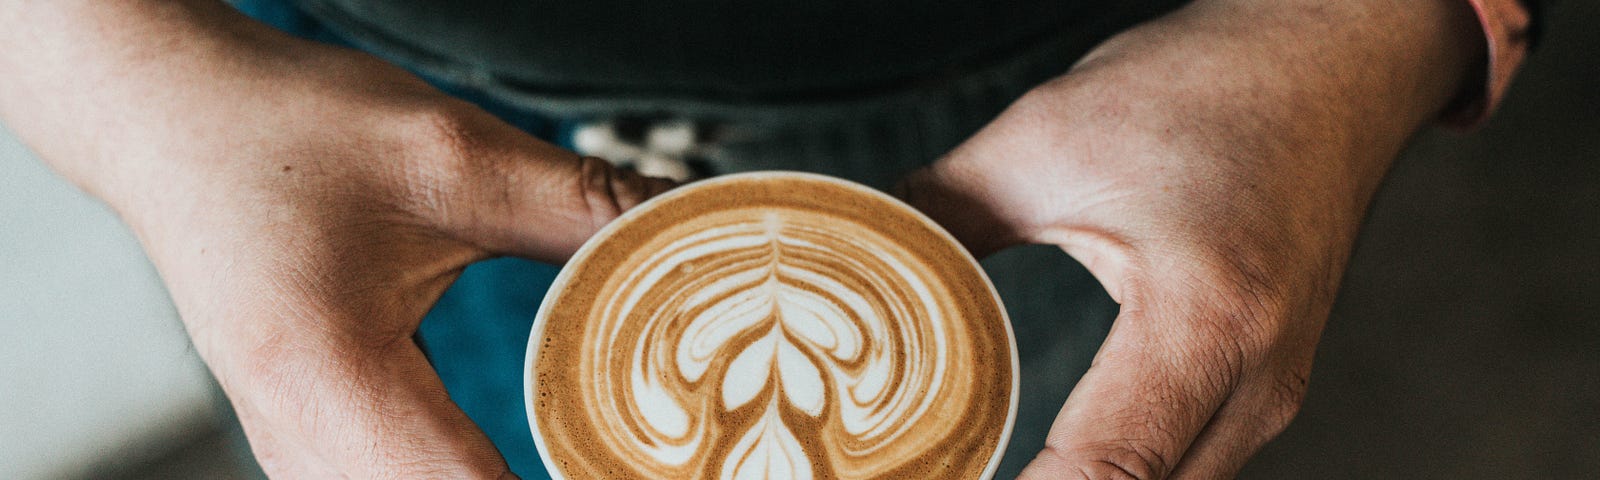 Close up of hands holding a cup of coffee with a heart